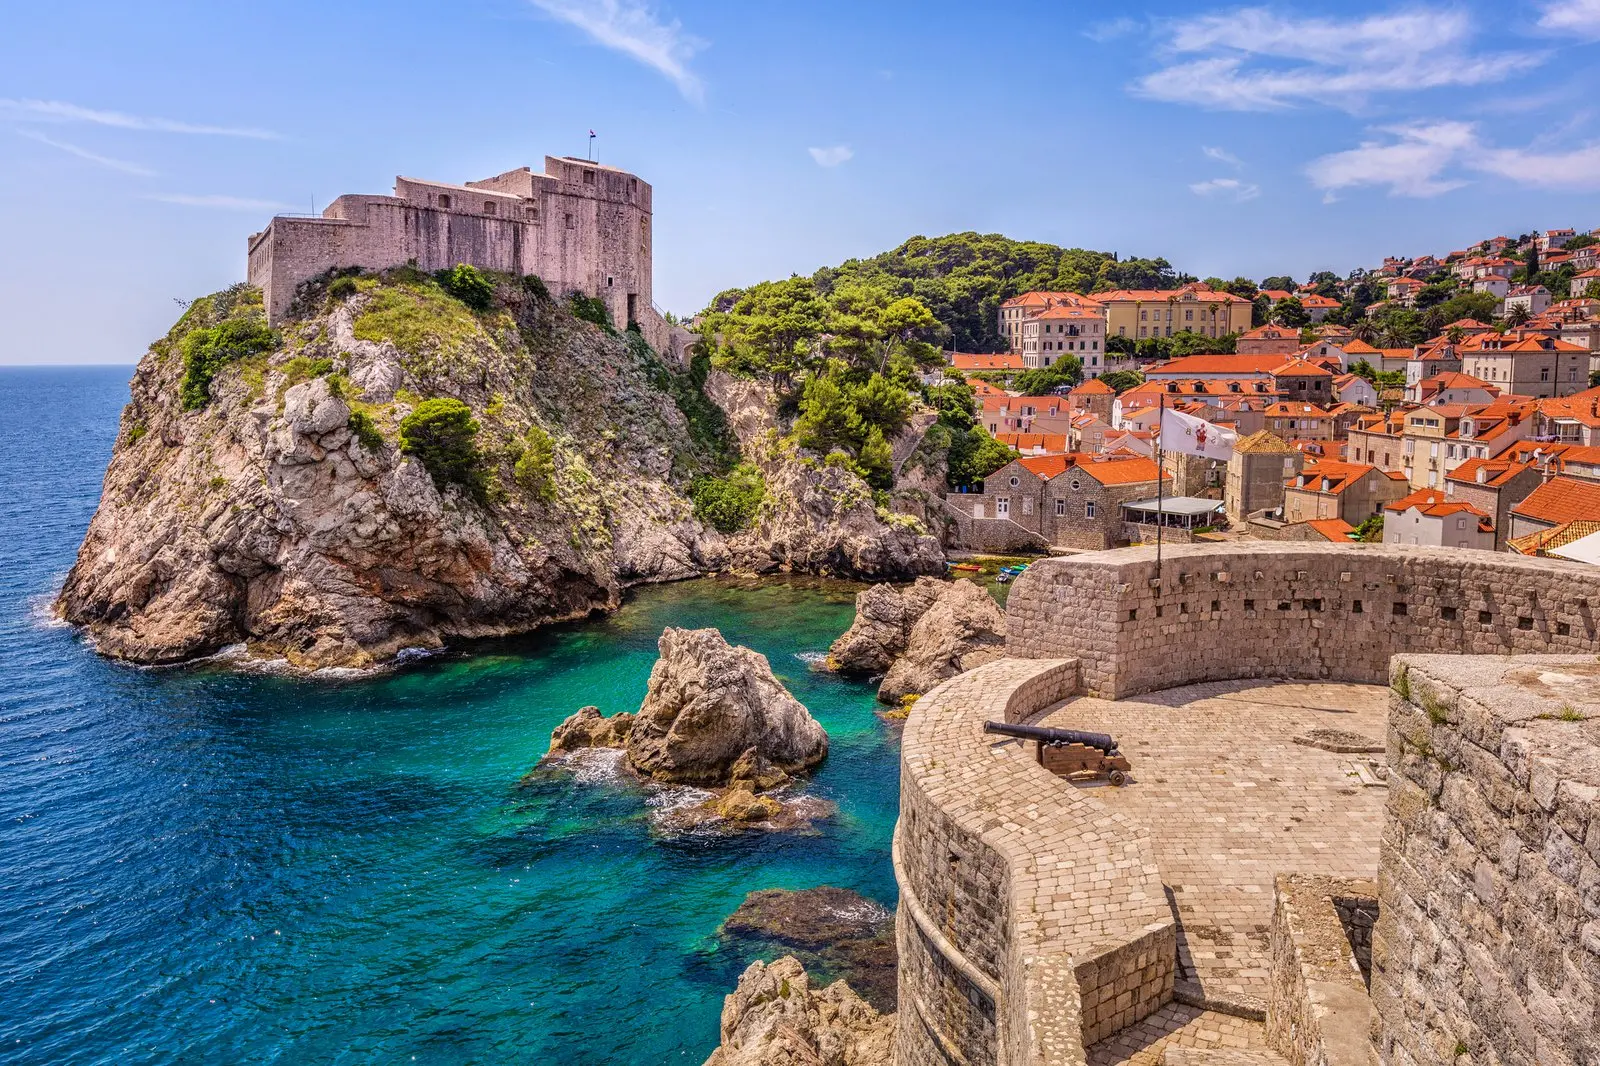 14-day Sailing Itineraries from Dubrovnik